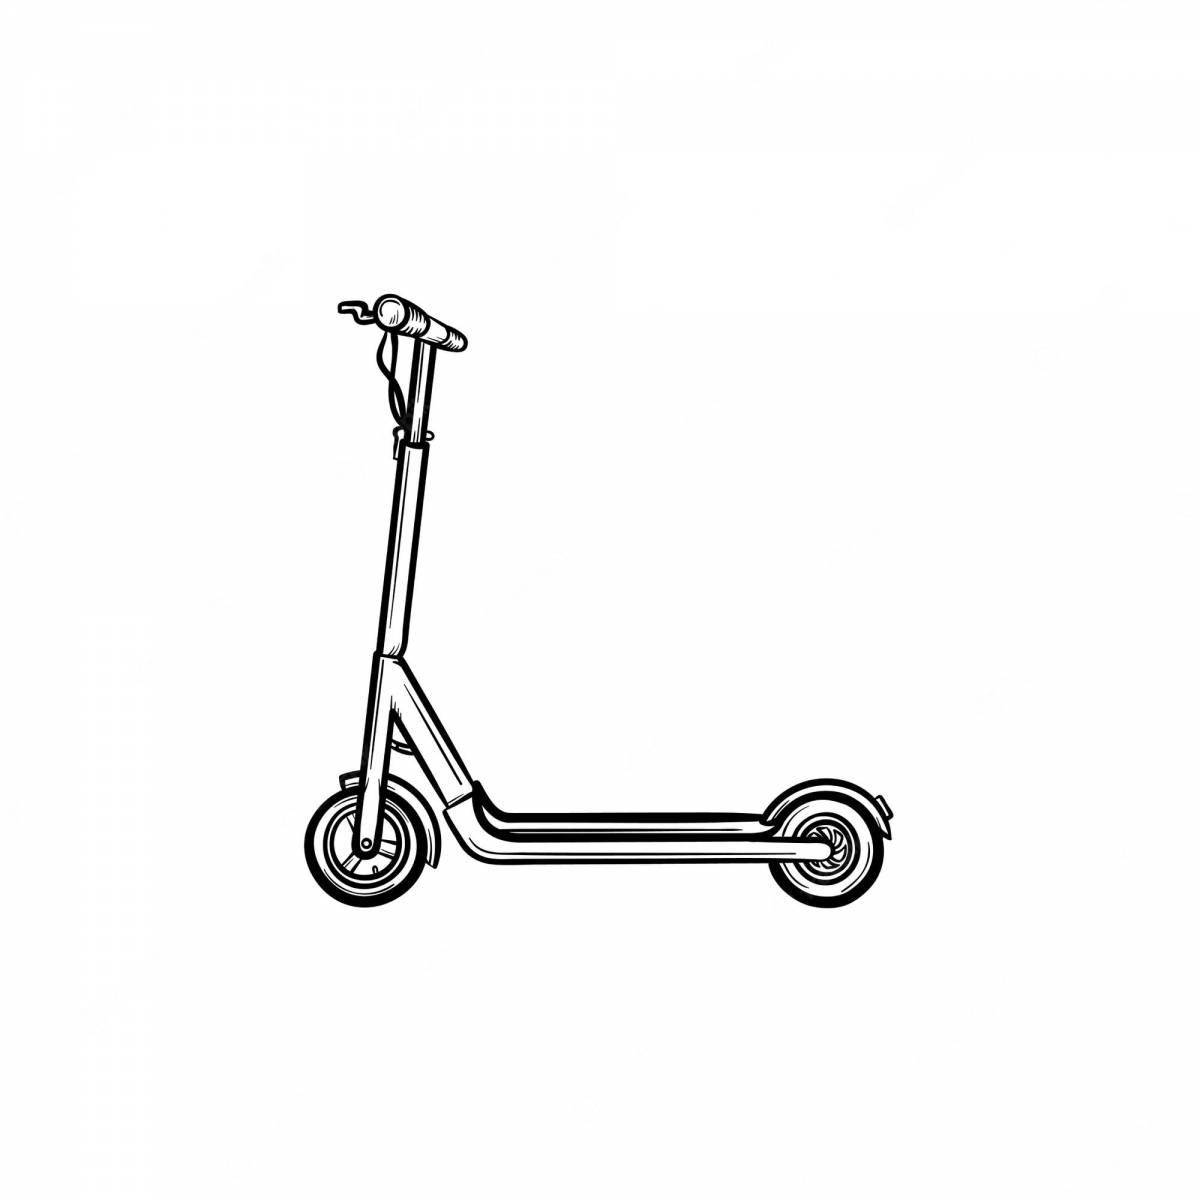 Adorable scooter coloring page for kids